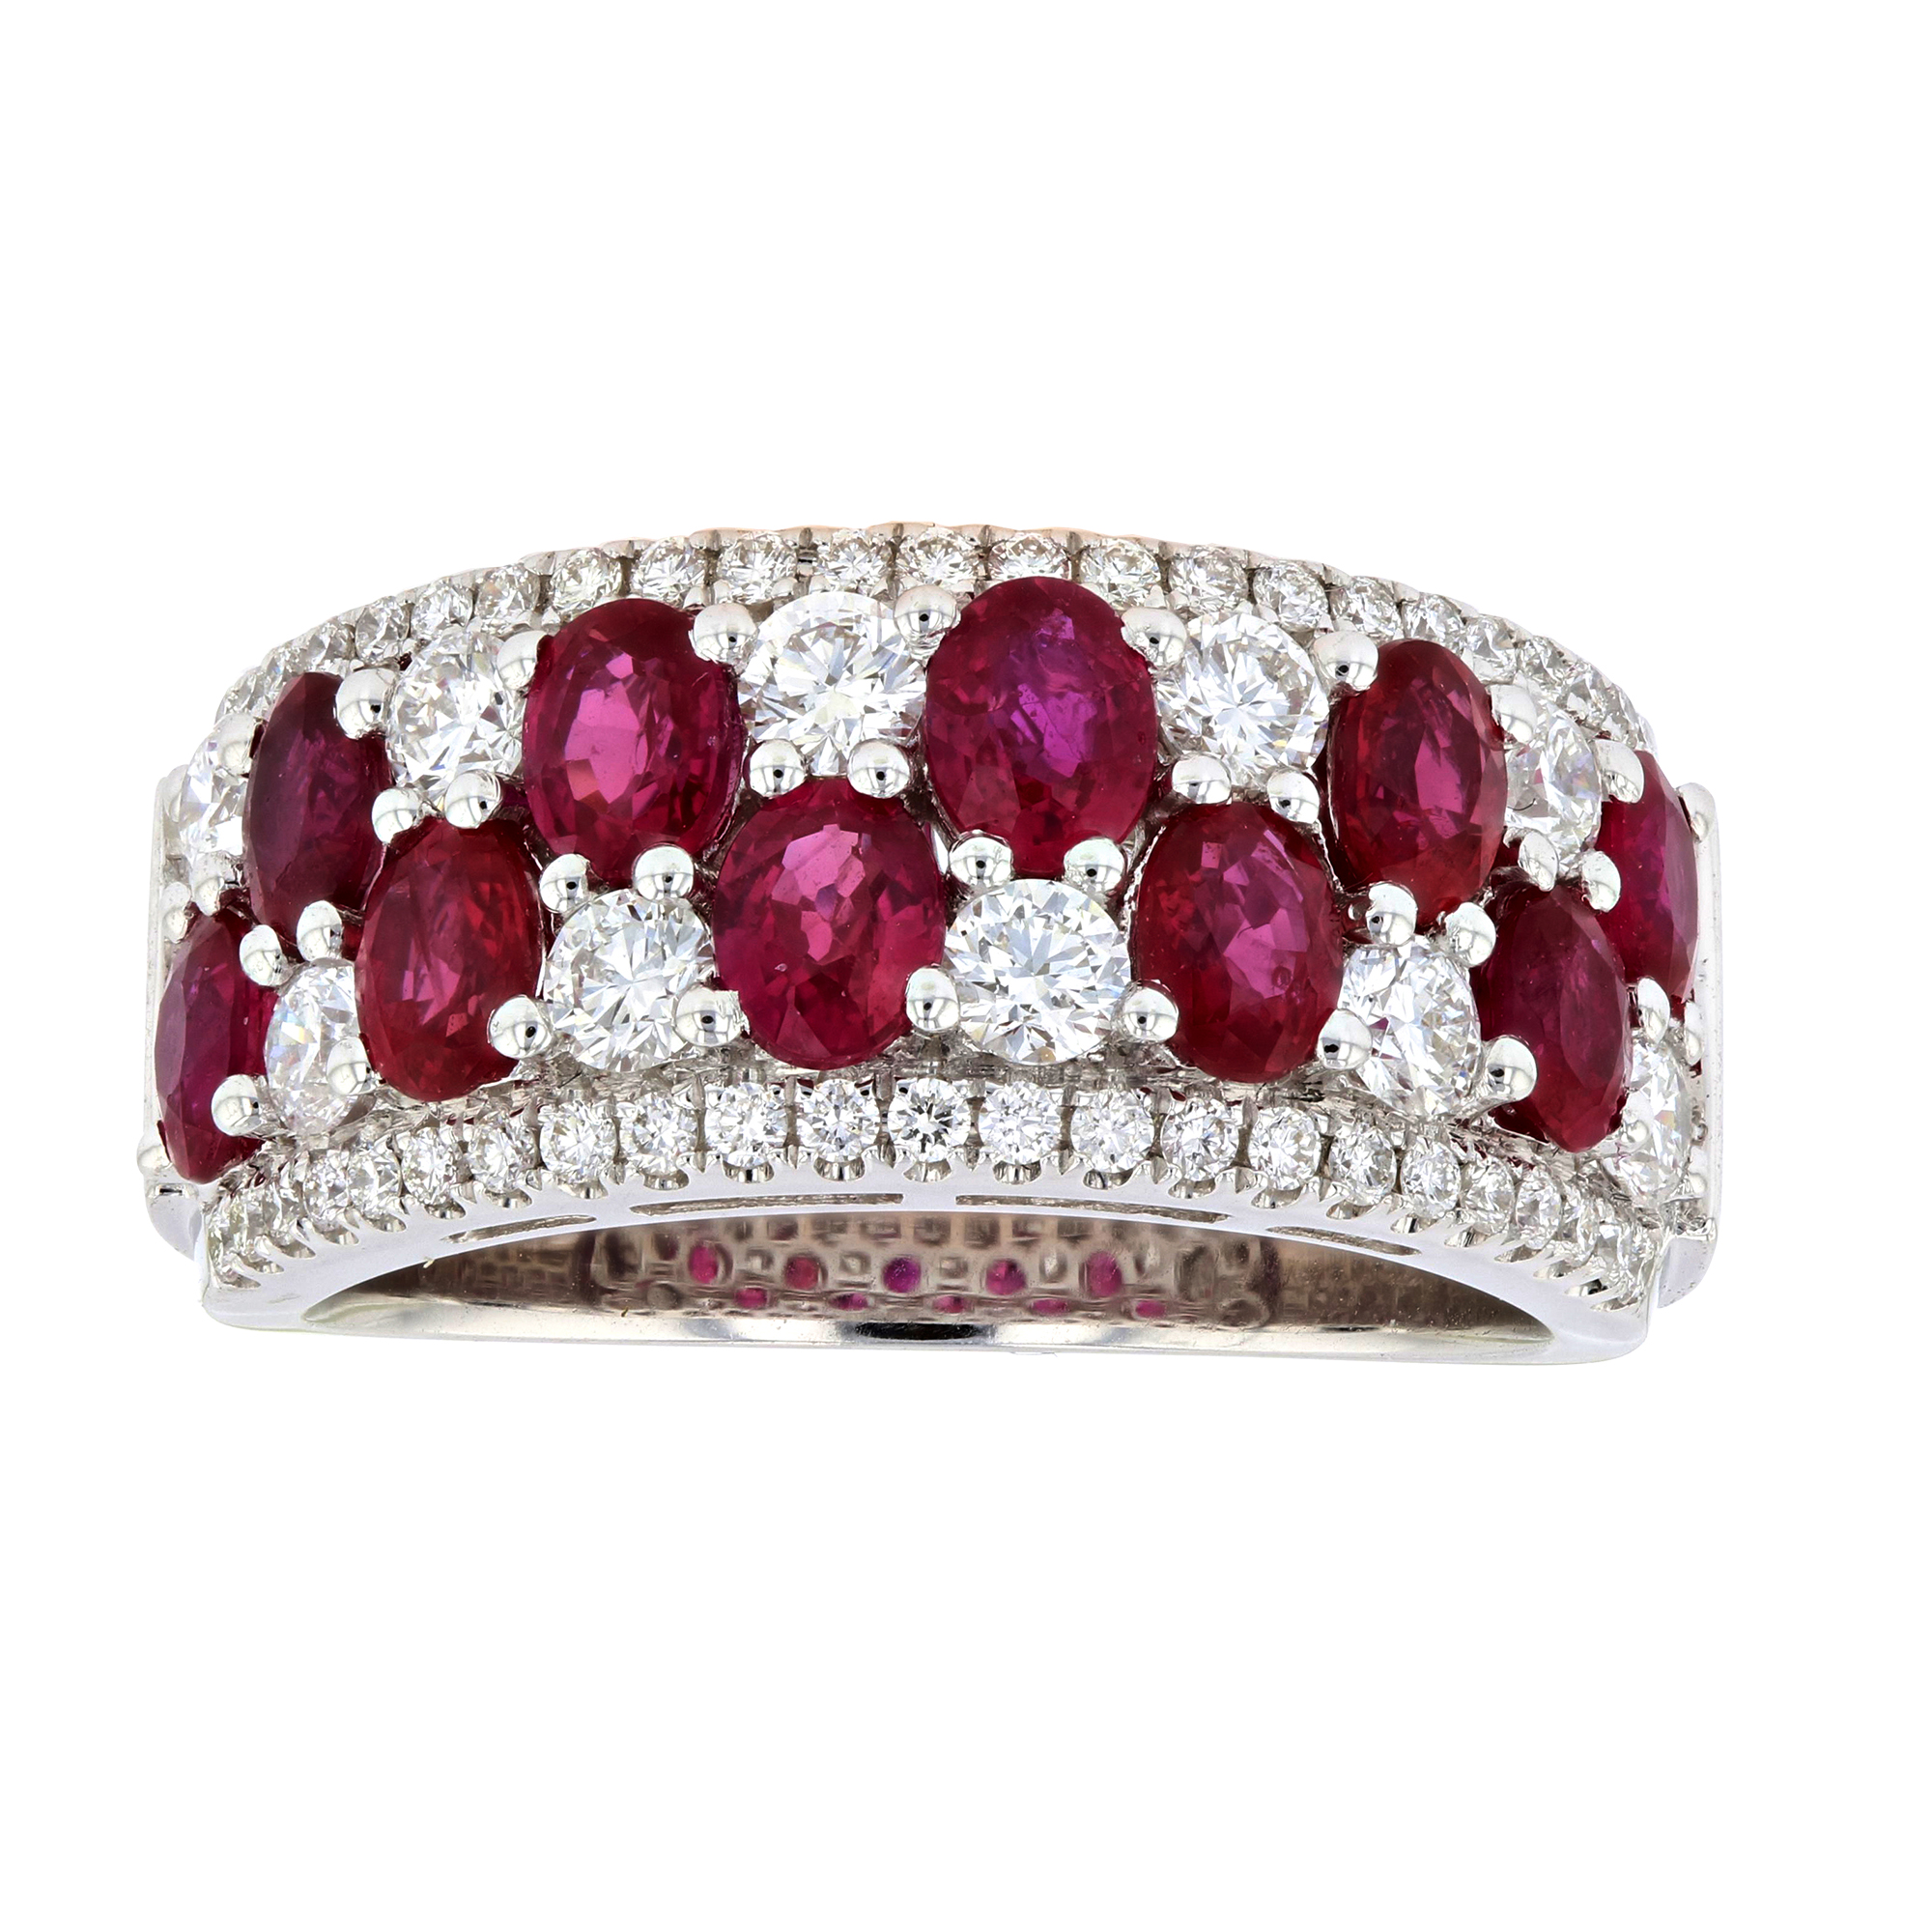 View 3.51ctw Diamond and Ruby Ring in 18k White Gold